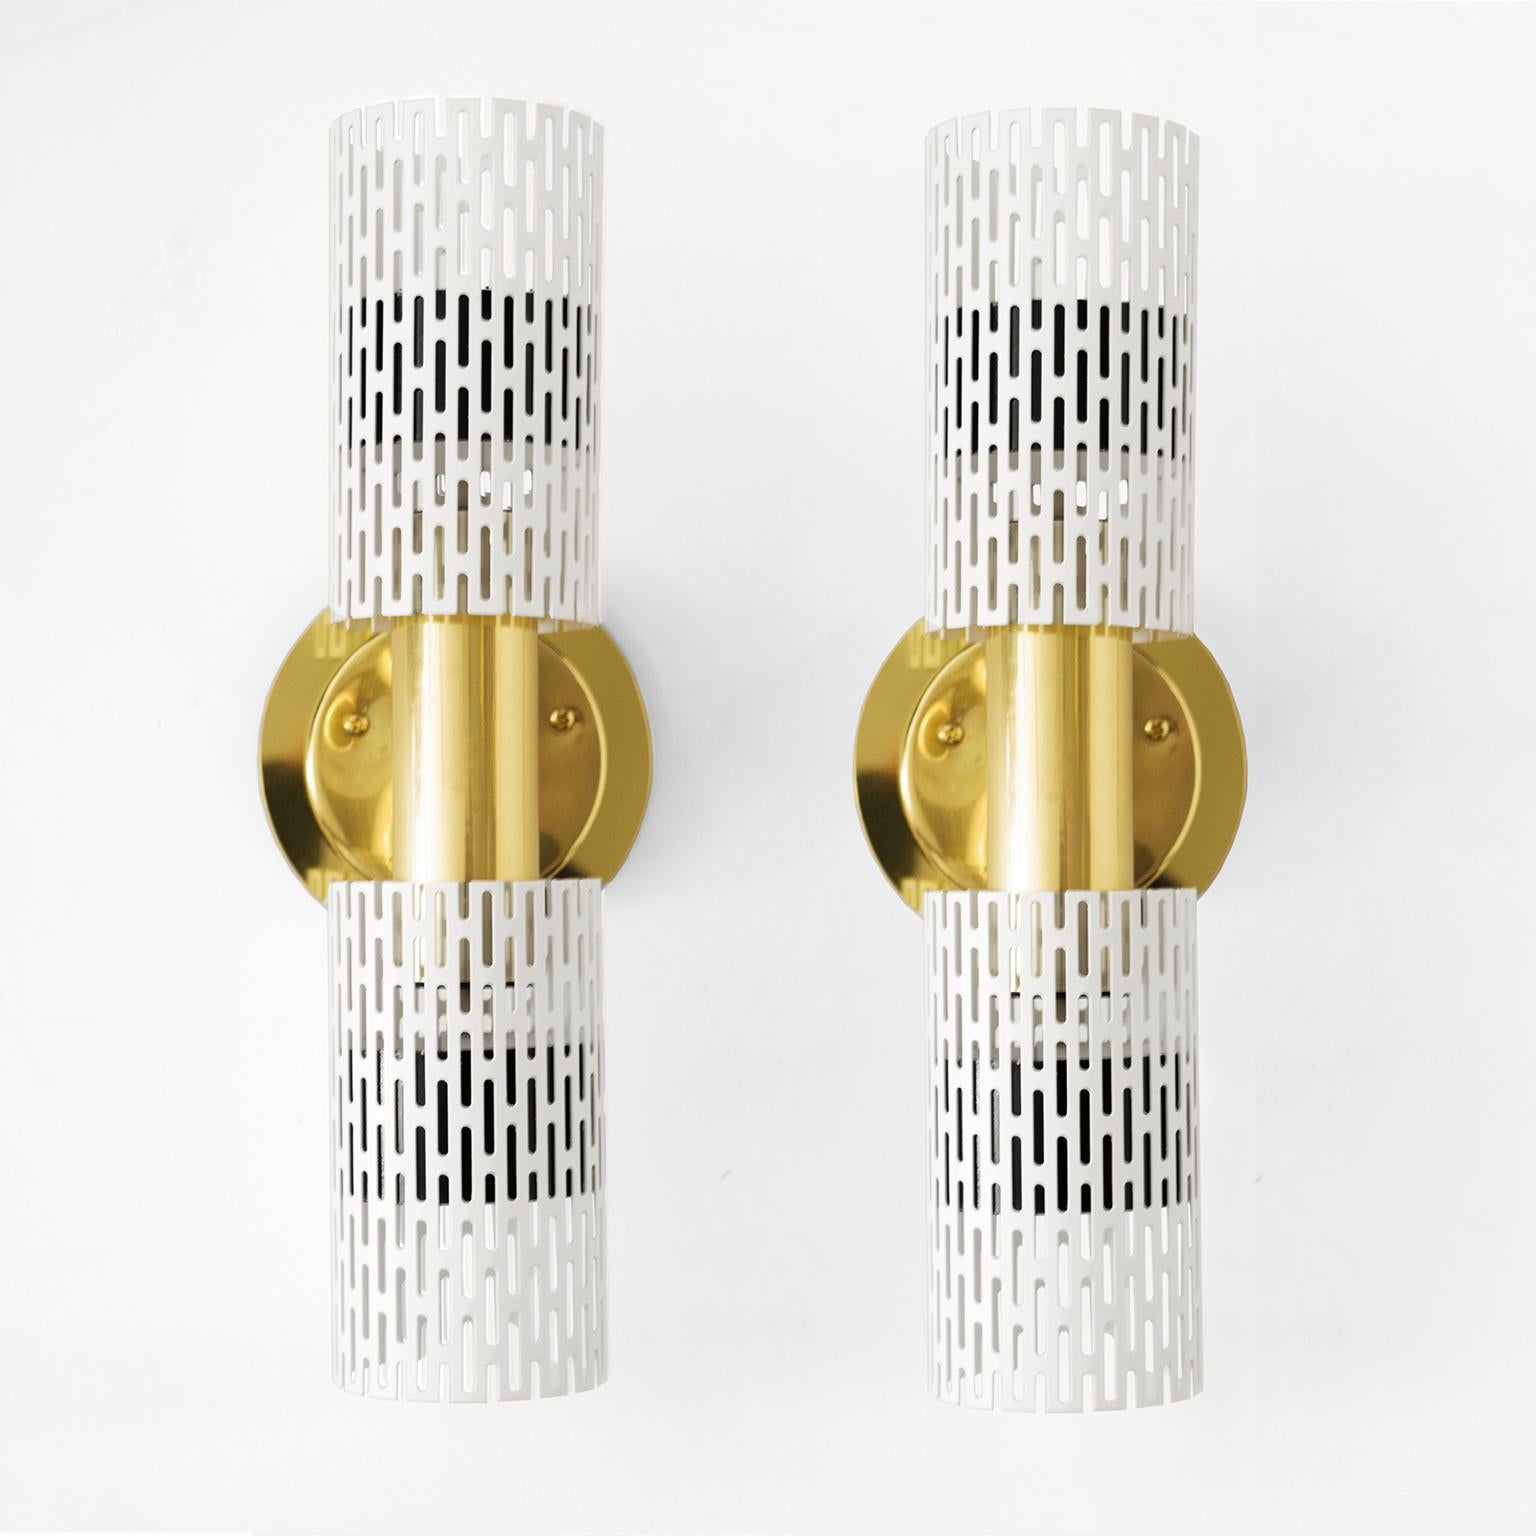 A pair of Harald Notini designed wall sconces with pieced tubular painted metal shades and polished brass frame and backplate. A custom brass element was created to allow easy installation for a standard American ‘J-box”. The sconces have been